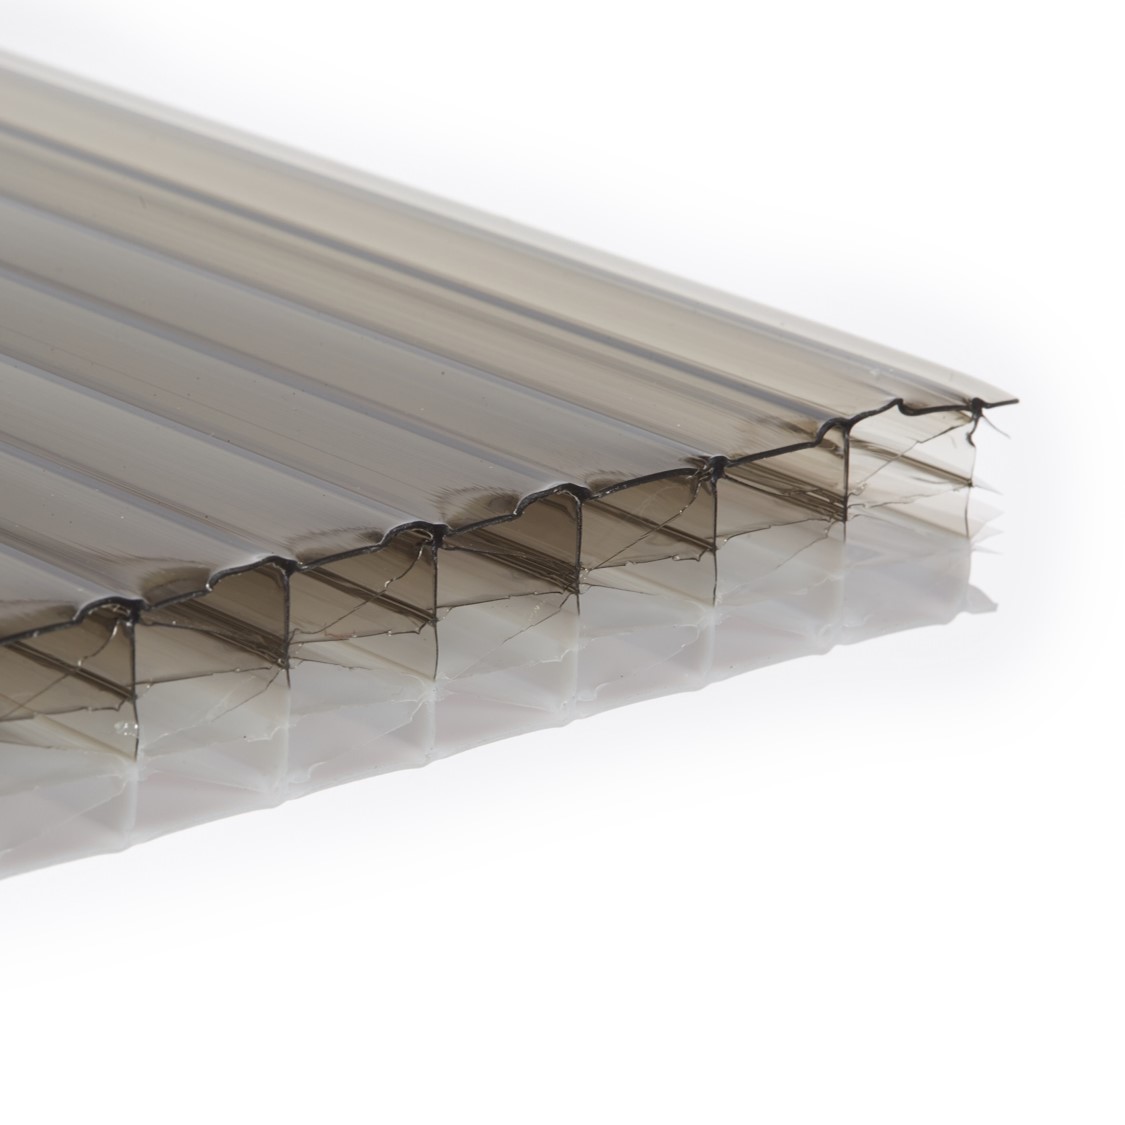 Thick:2-5mm Clear Polycarbonate Lexan Sheet Roofing Sheet Multi Sizes  Available